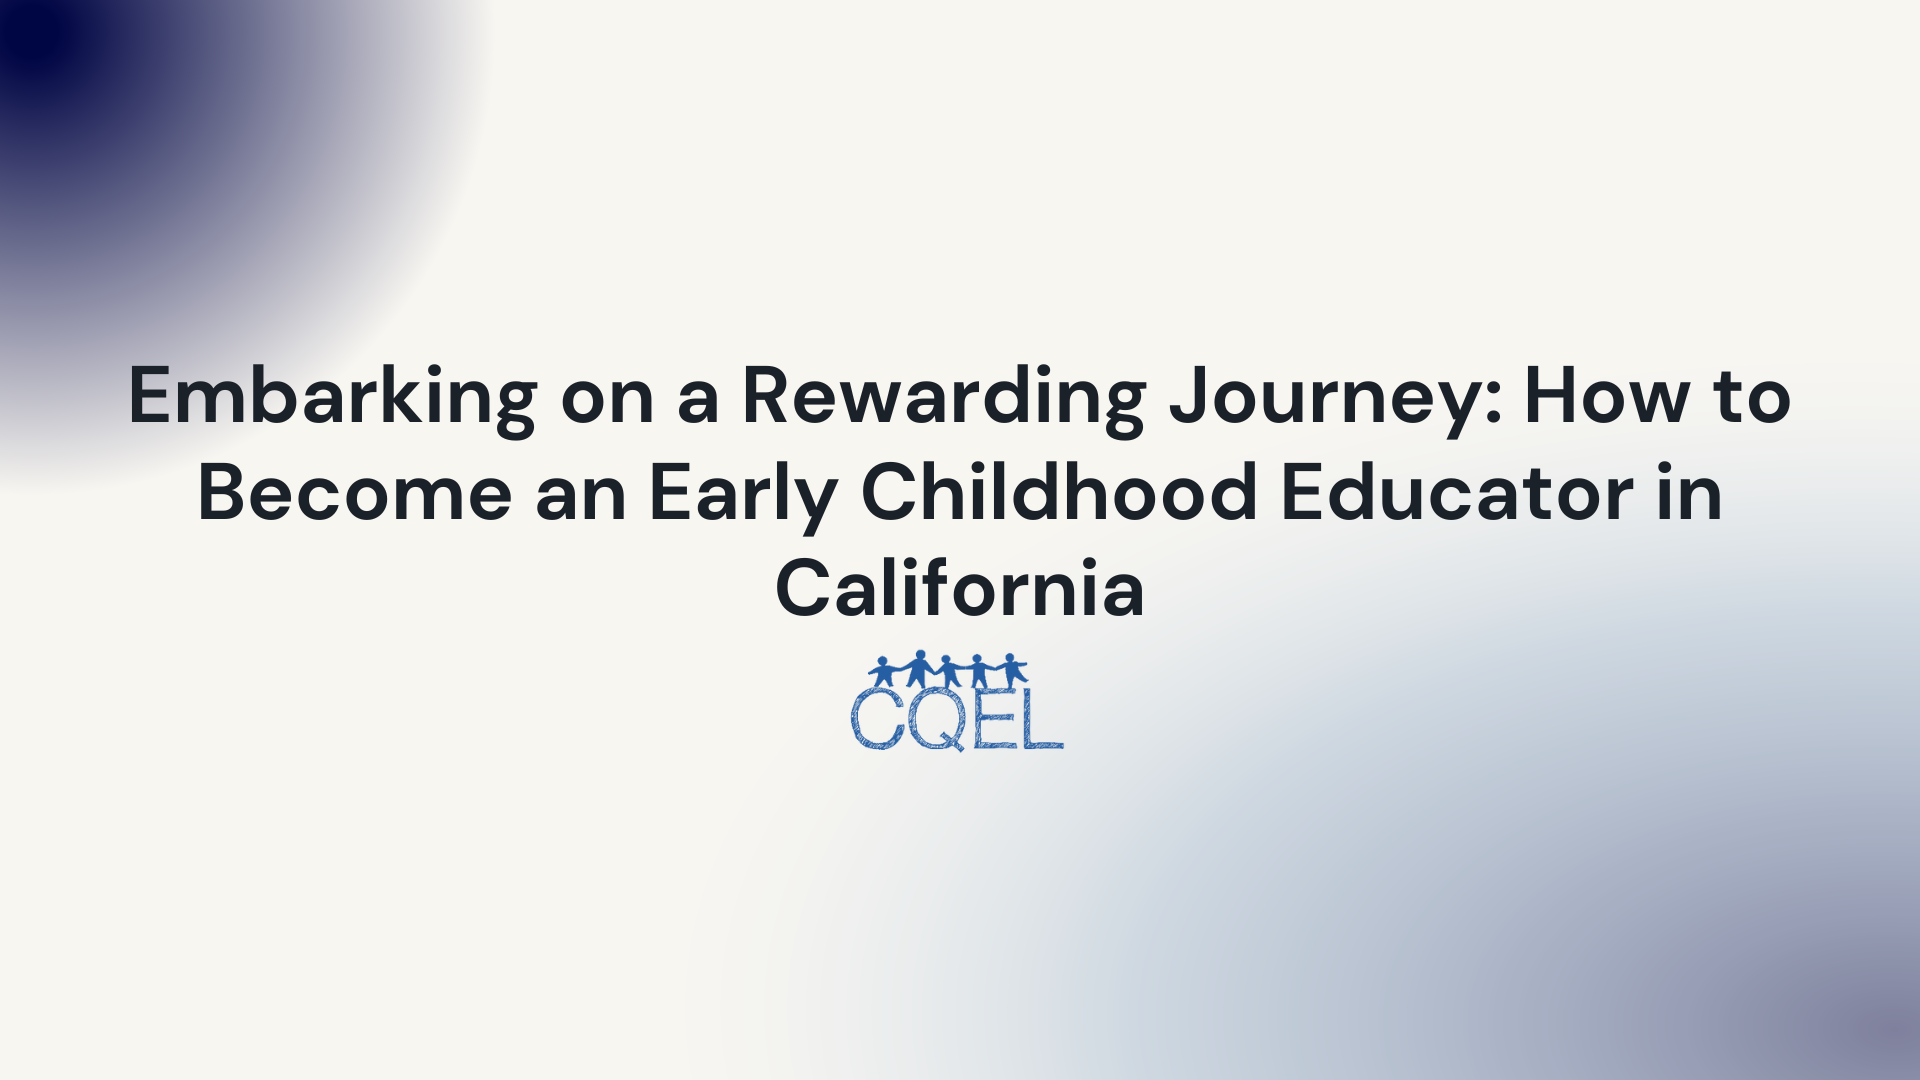 Embarking on a Rewarding Journey: How to Become an Early Childhood Educator in California